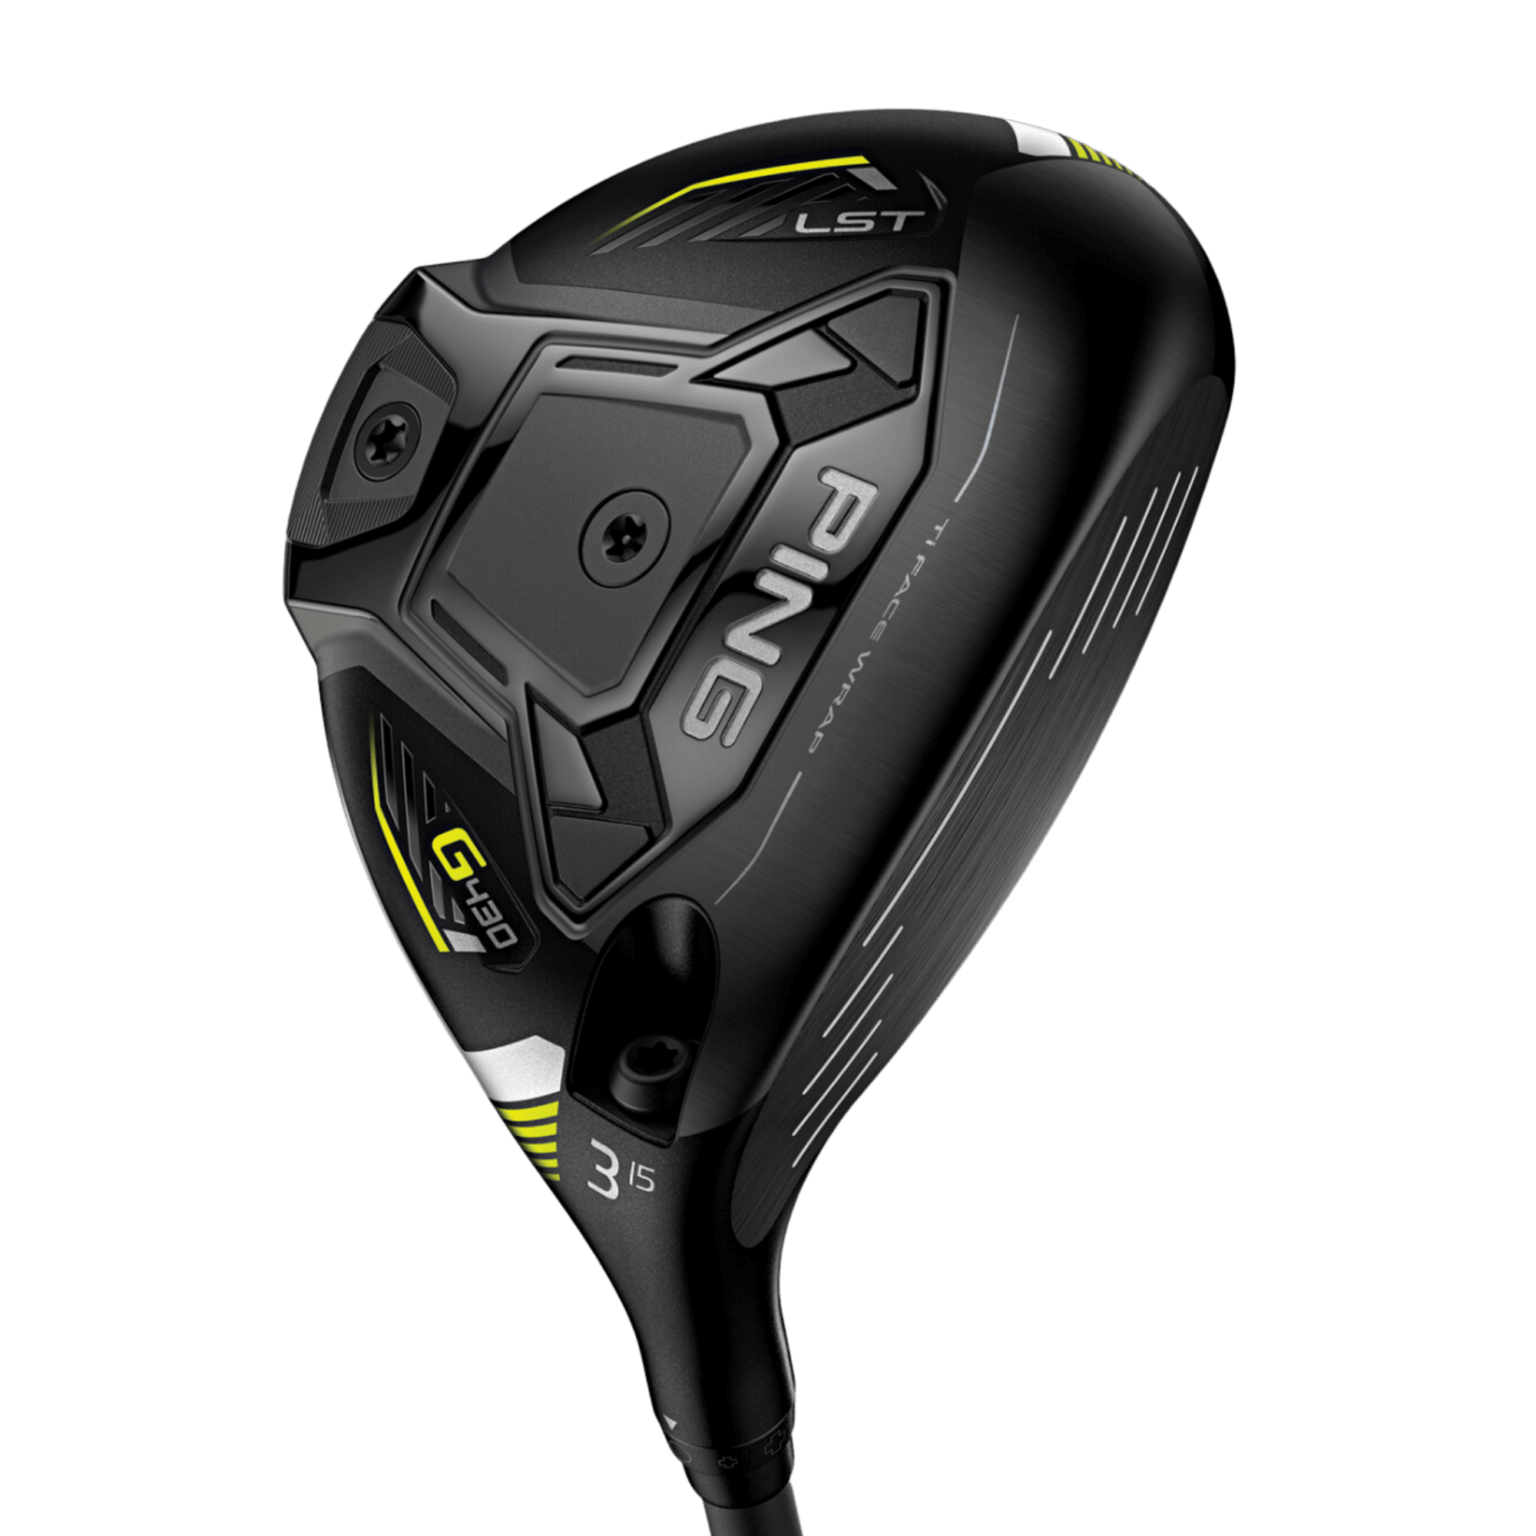 PING G430 LST Fairway Woods Review